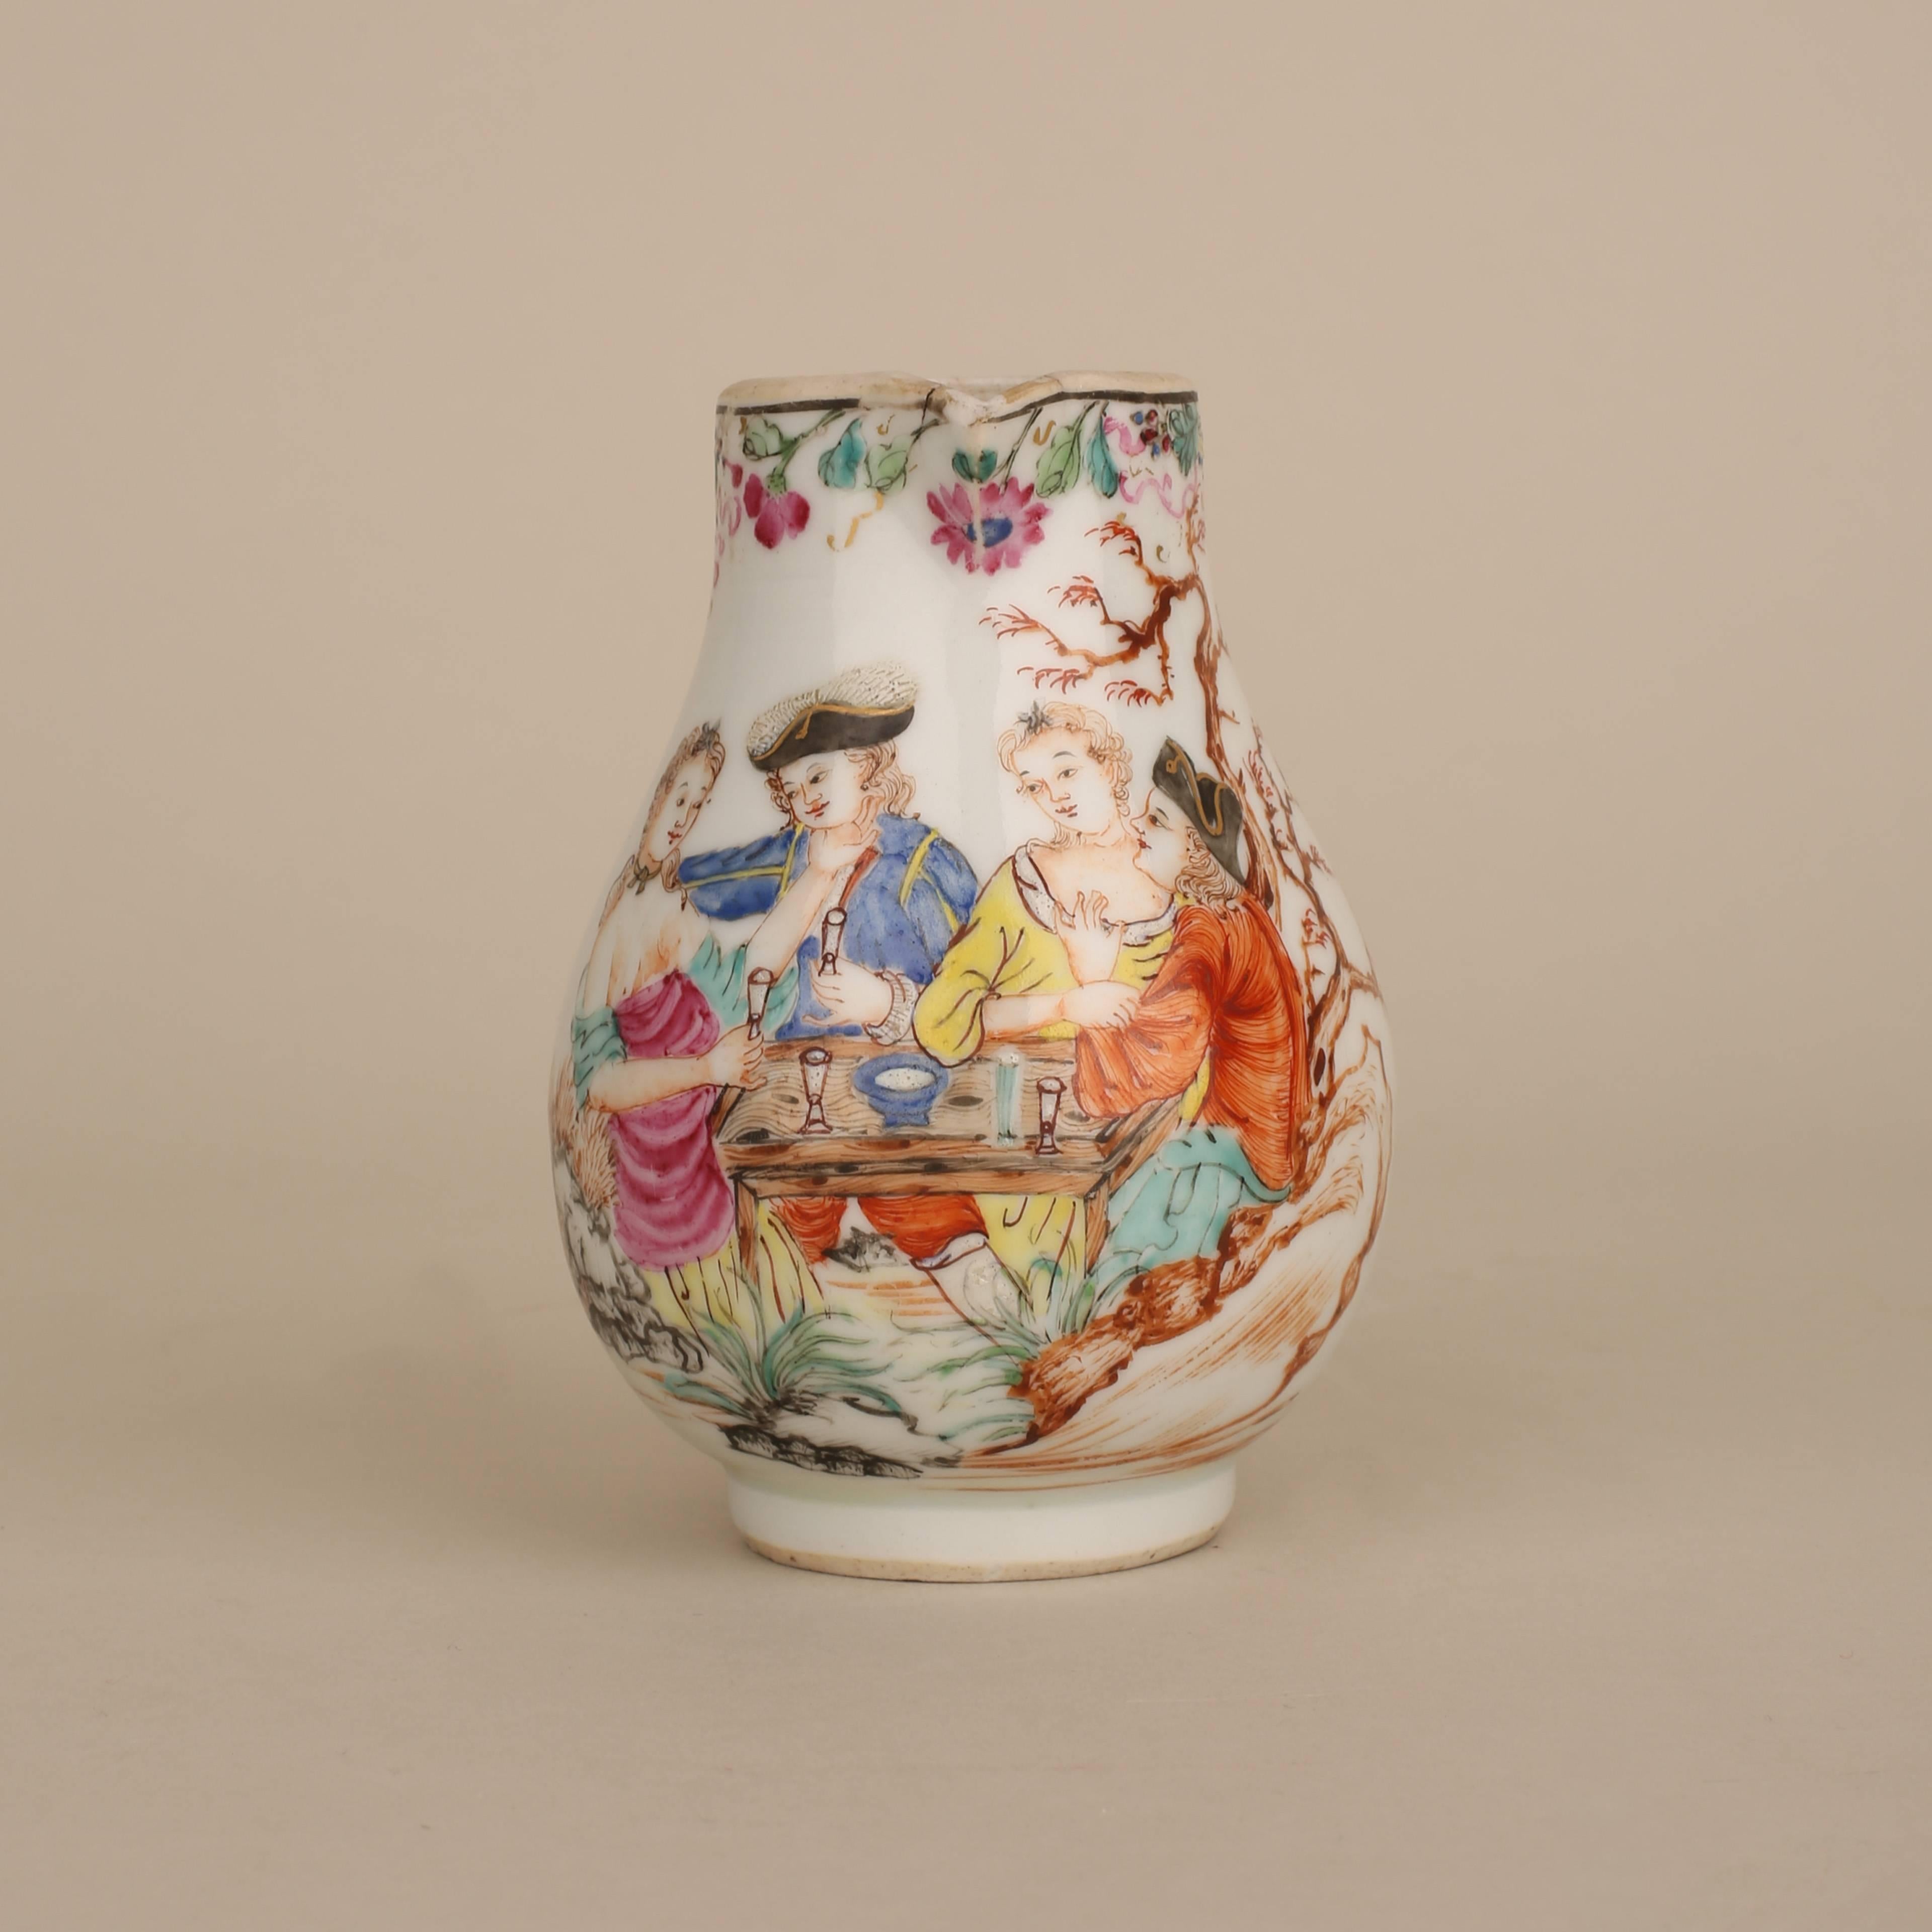 Qing Chinese Porcelain Cream Jug with Two European Amorous Couples, 18th Century